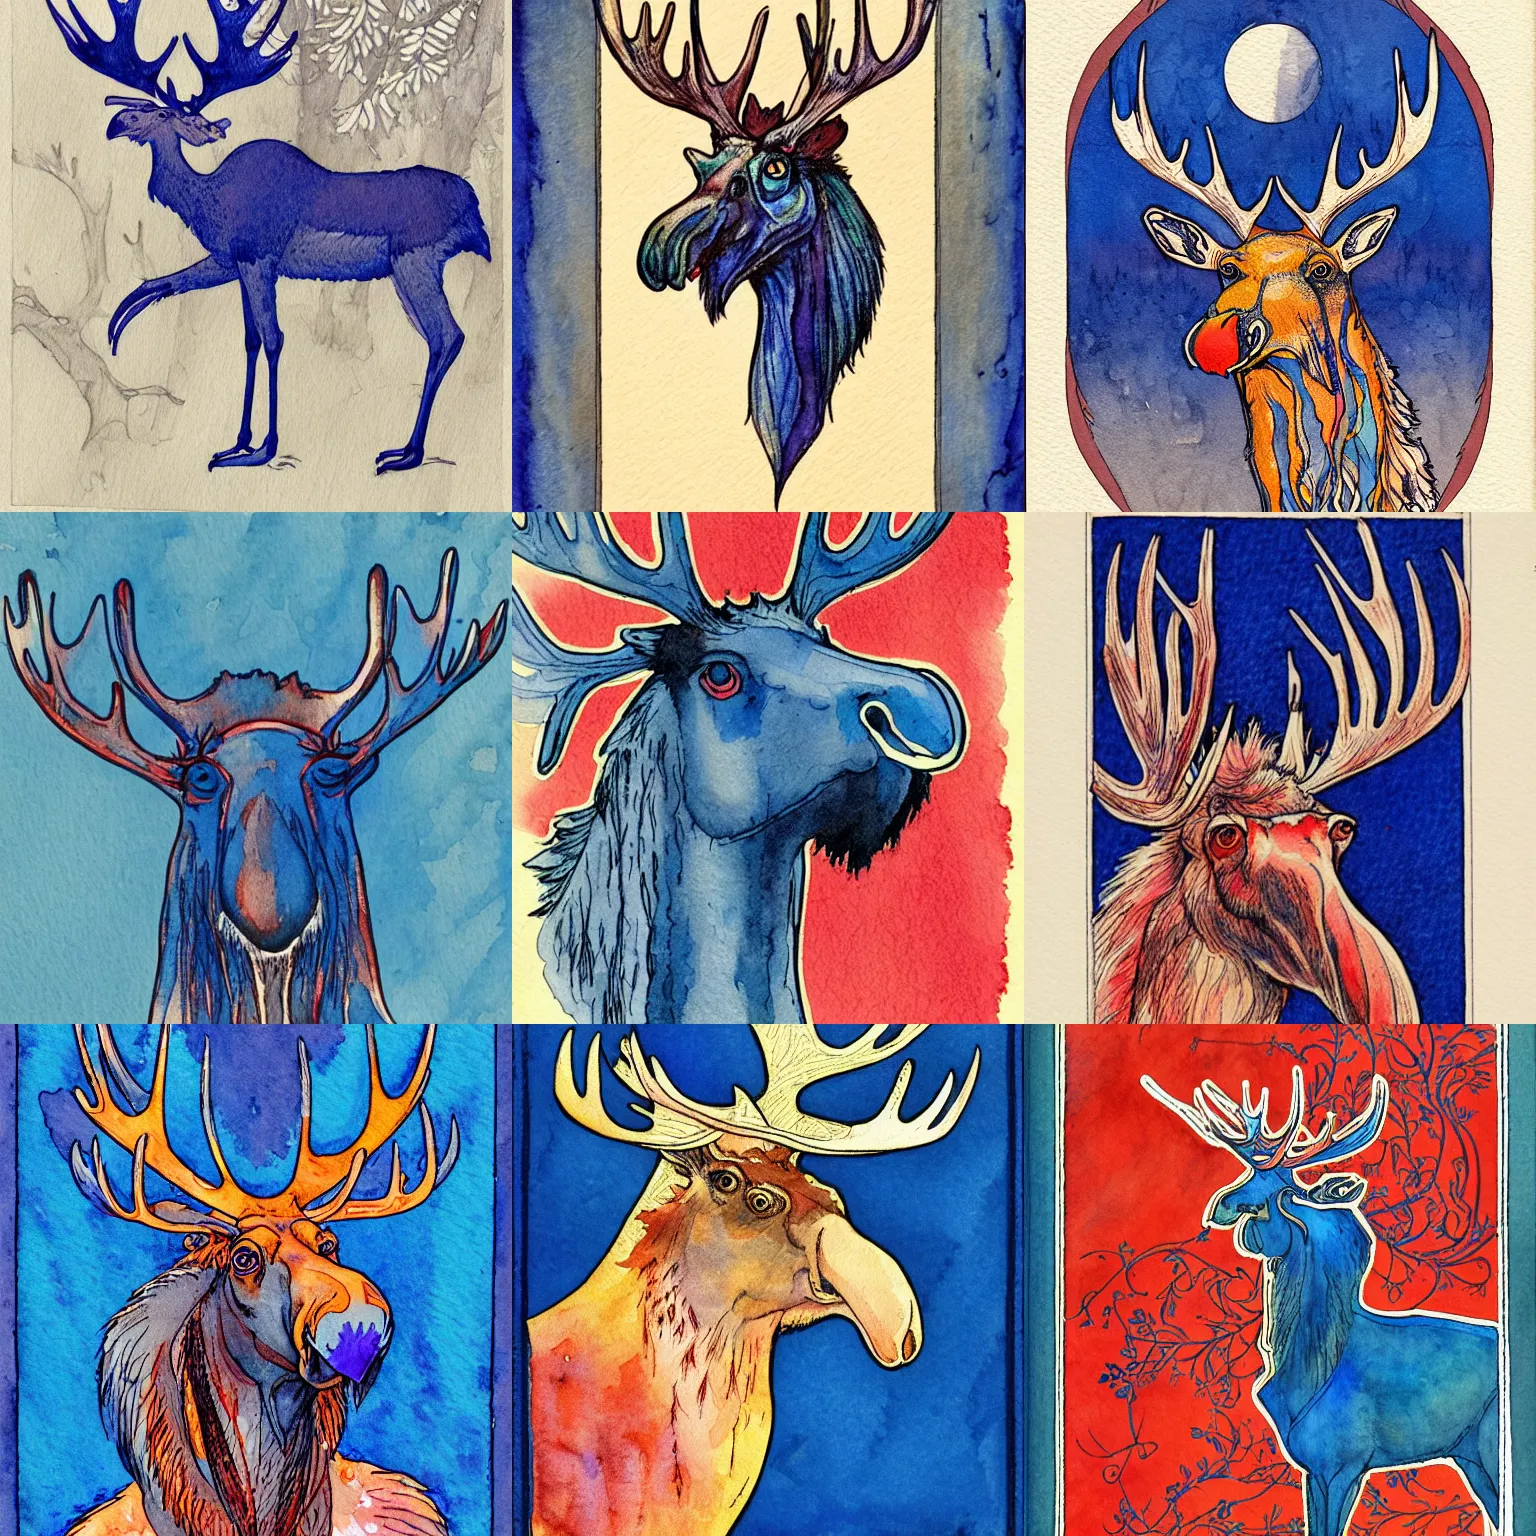 Prompt: turkey - moose creature with long neck and 4 arms | romanticist, art nouveau illustration, loose linework, watercolor wash over inks, cadmium red, cobalt blue, payne's grey, luminism